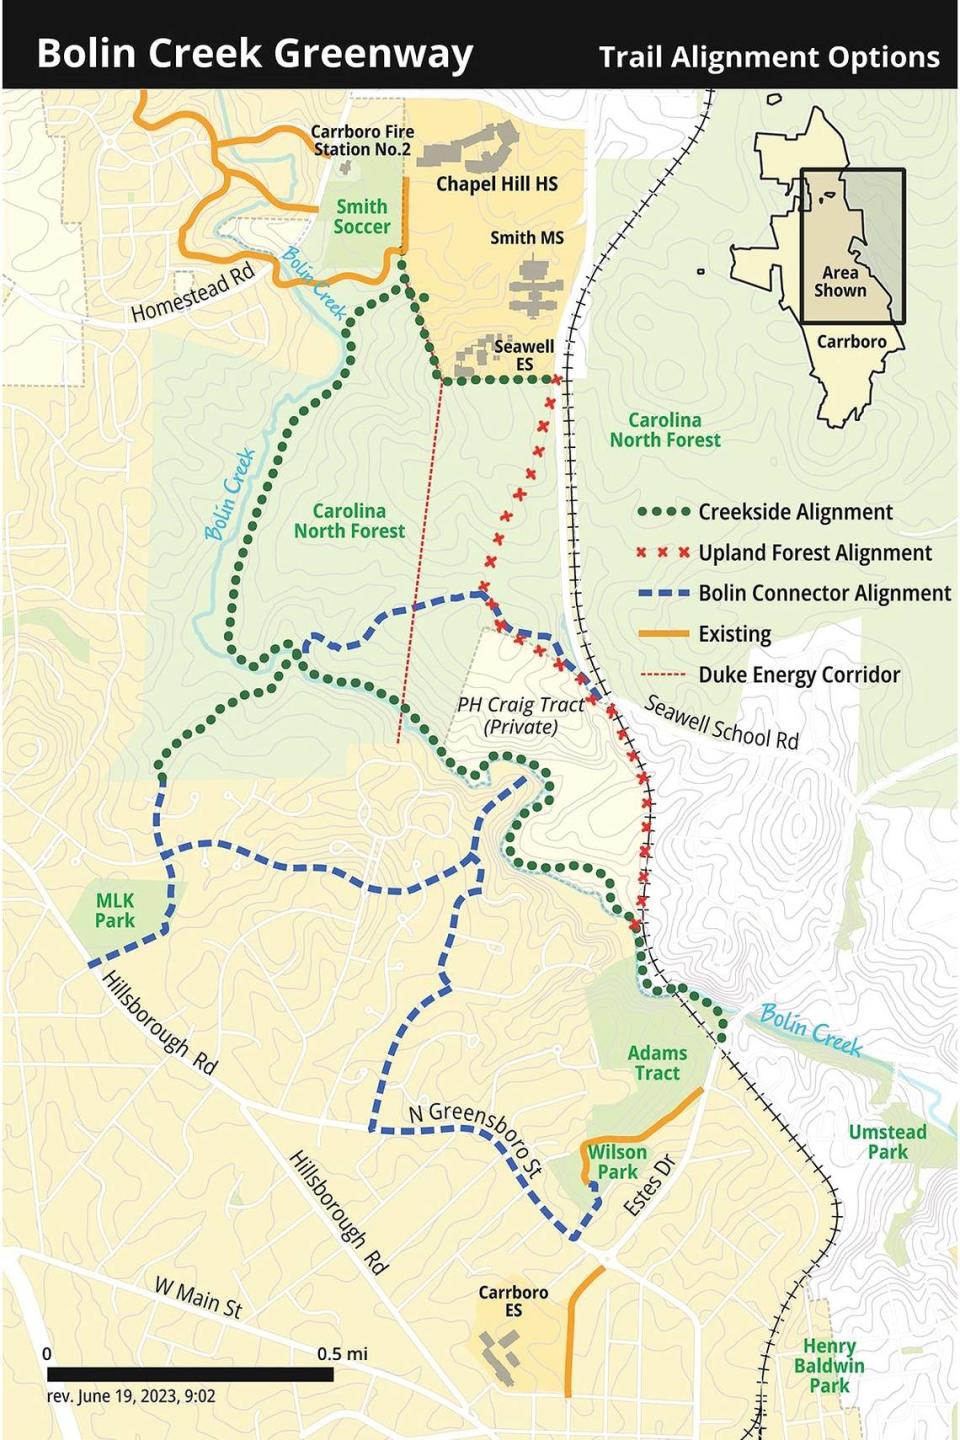 The Carrboro Town Council adopted the Creekside Alignment for the next phase of the Bolin Creek Greenway project.